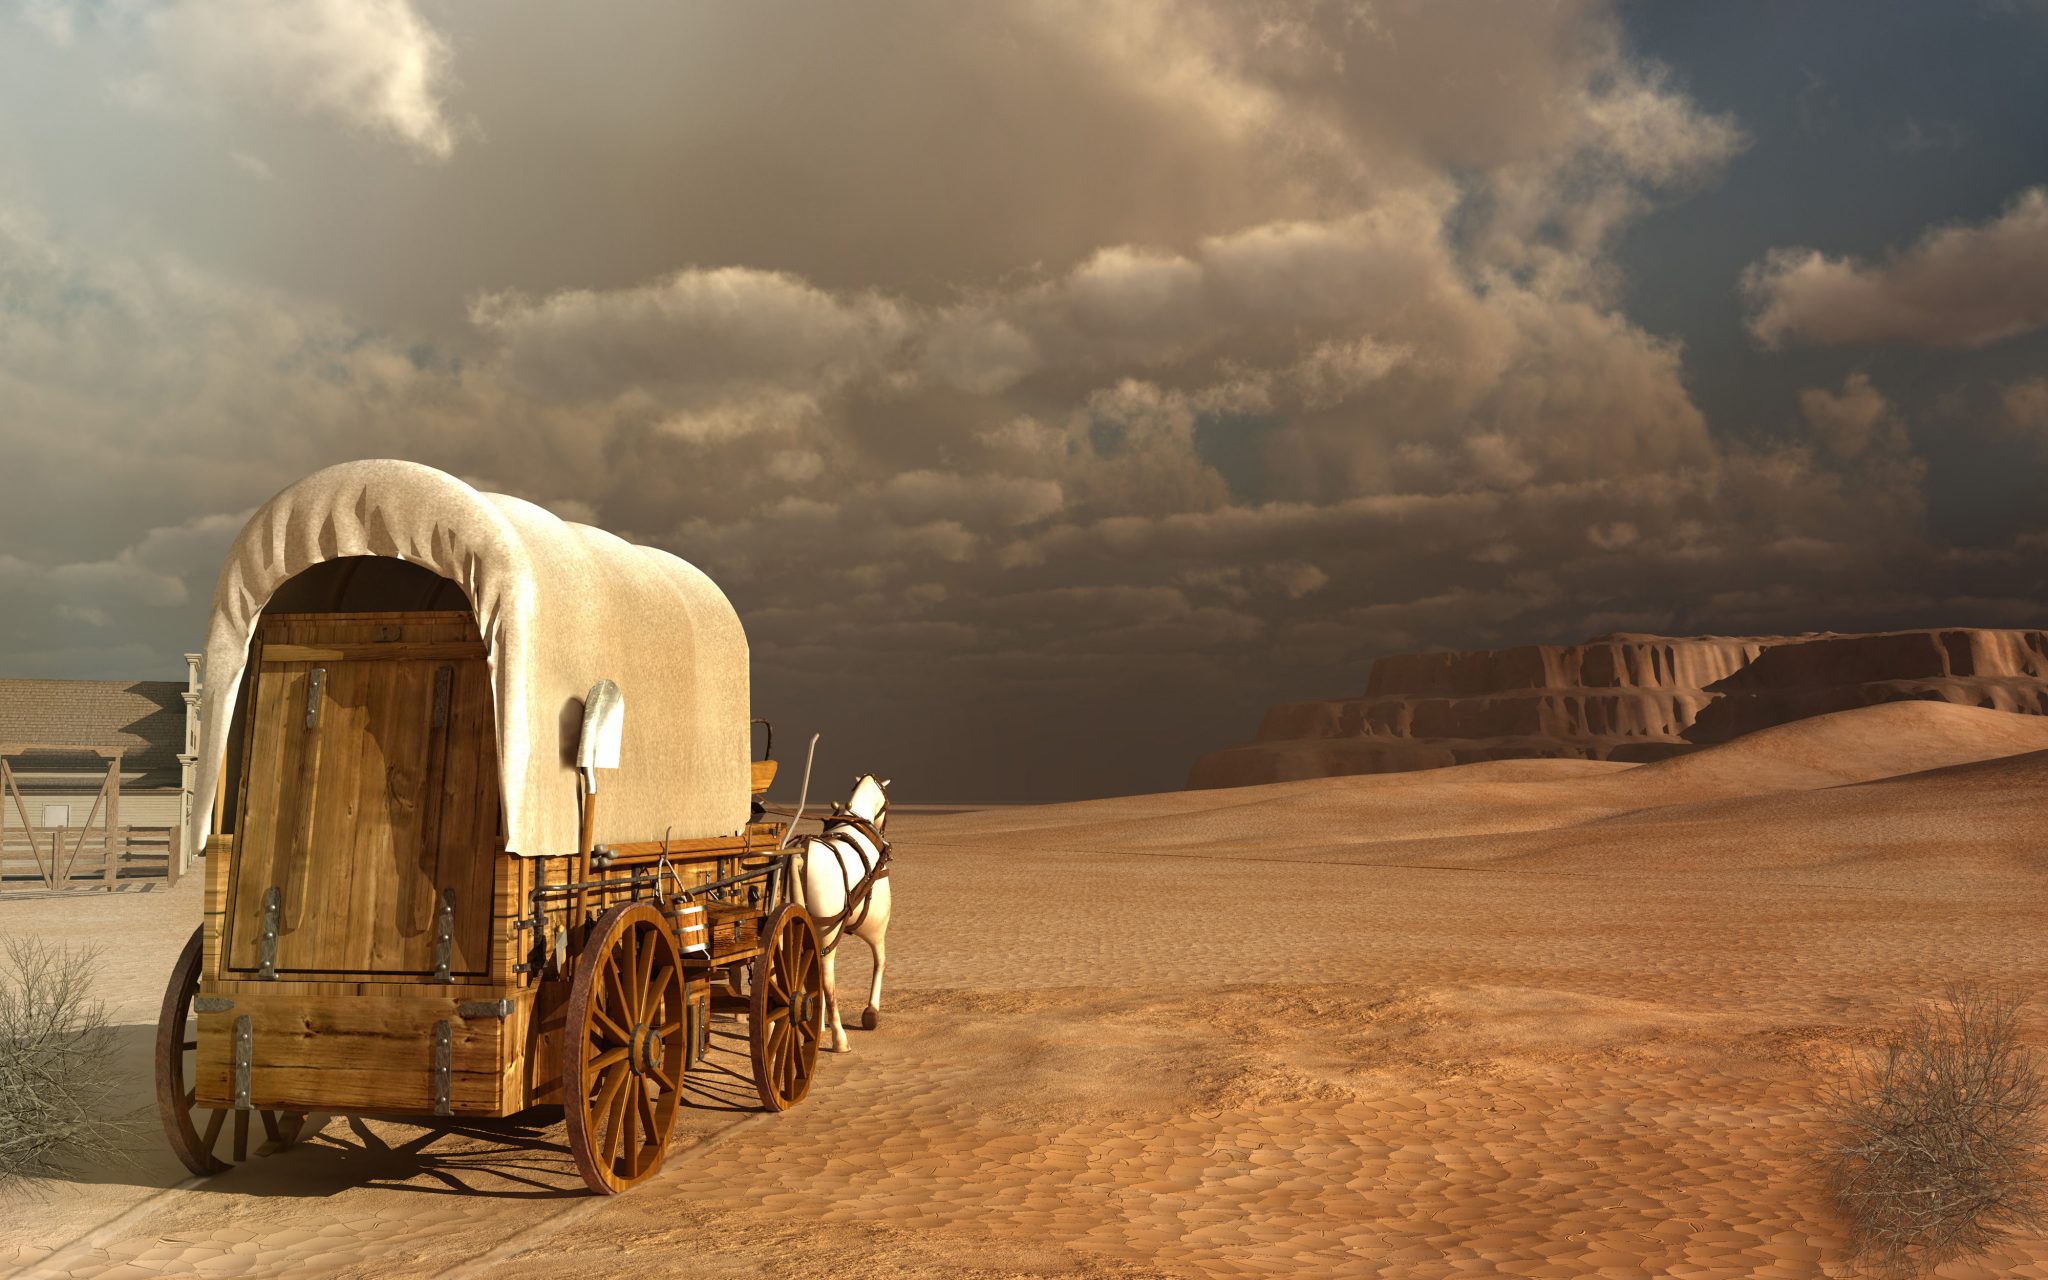 A pioneer's covered wagon in the desert a painting Tell Your Story